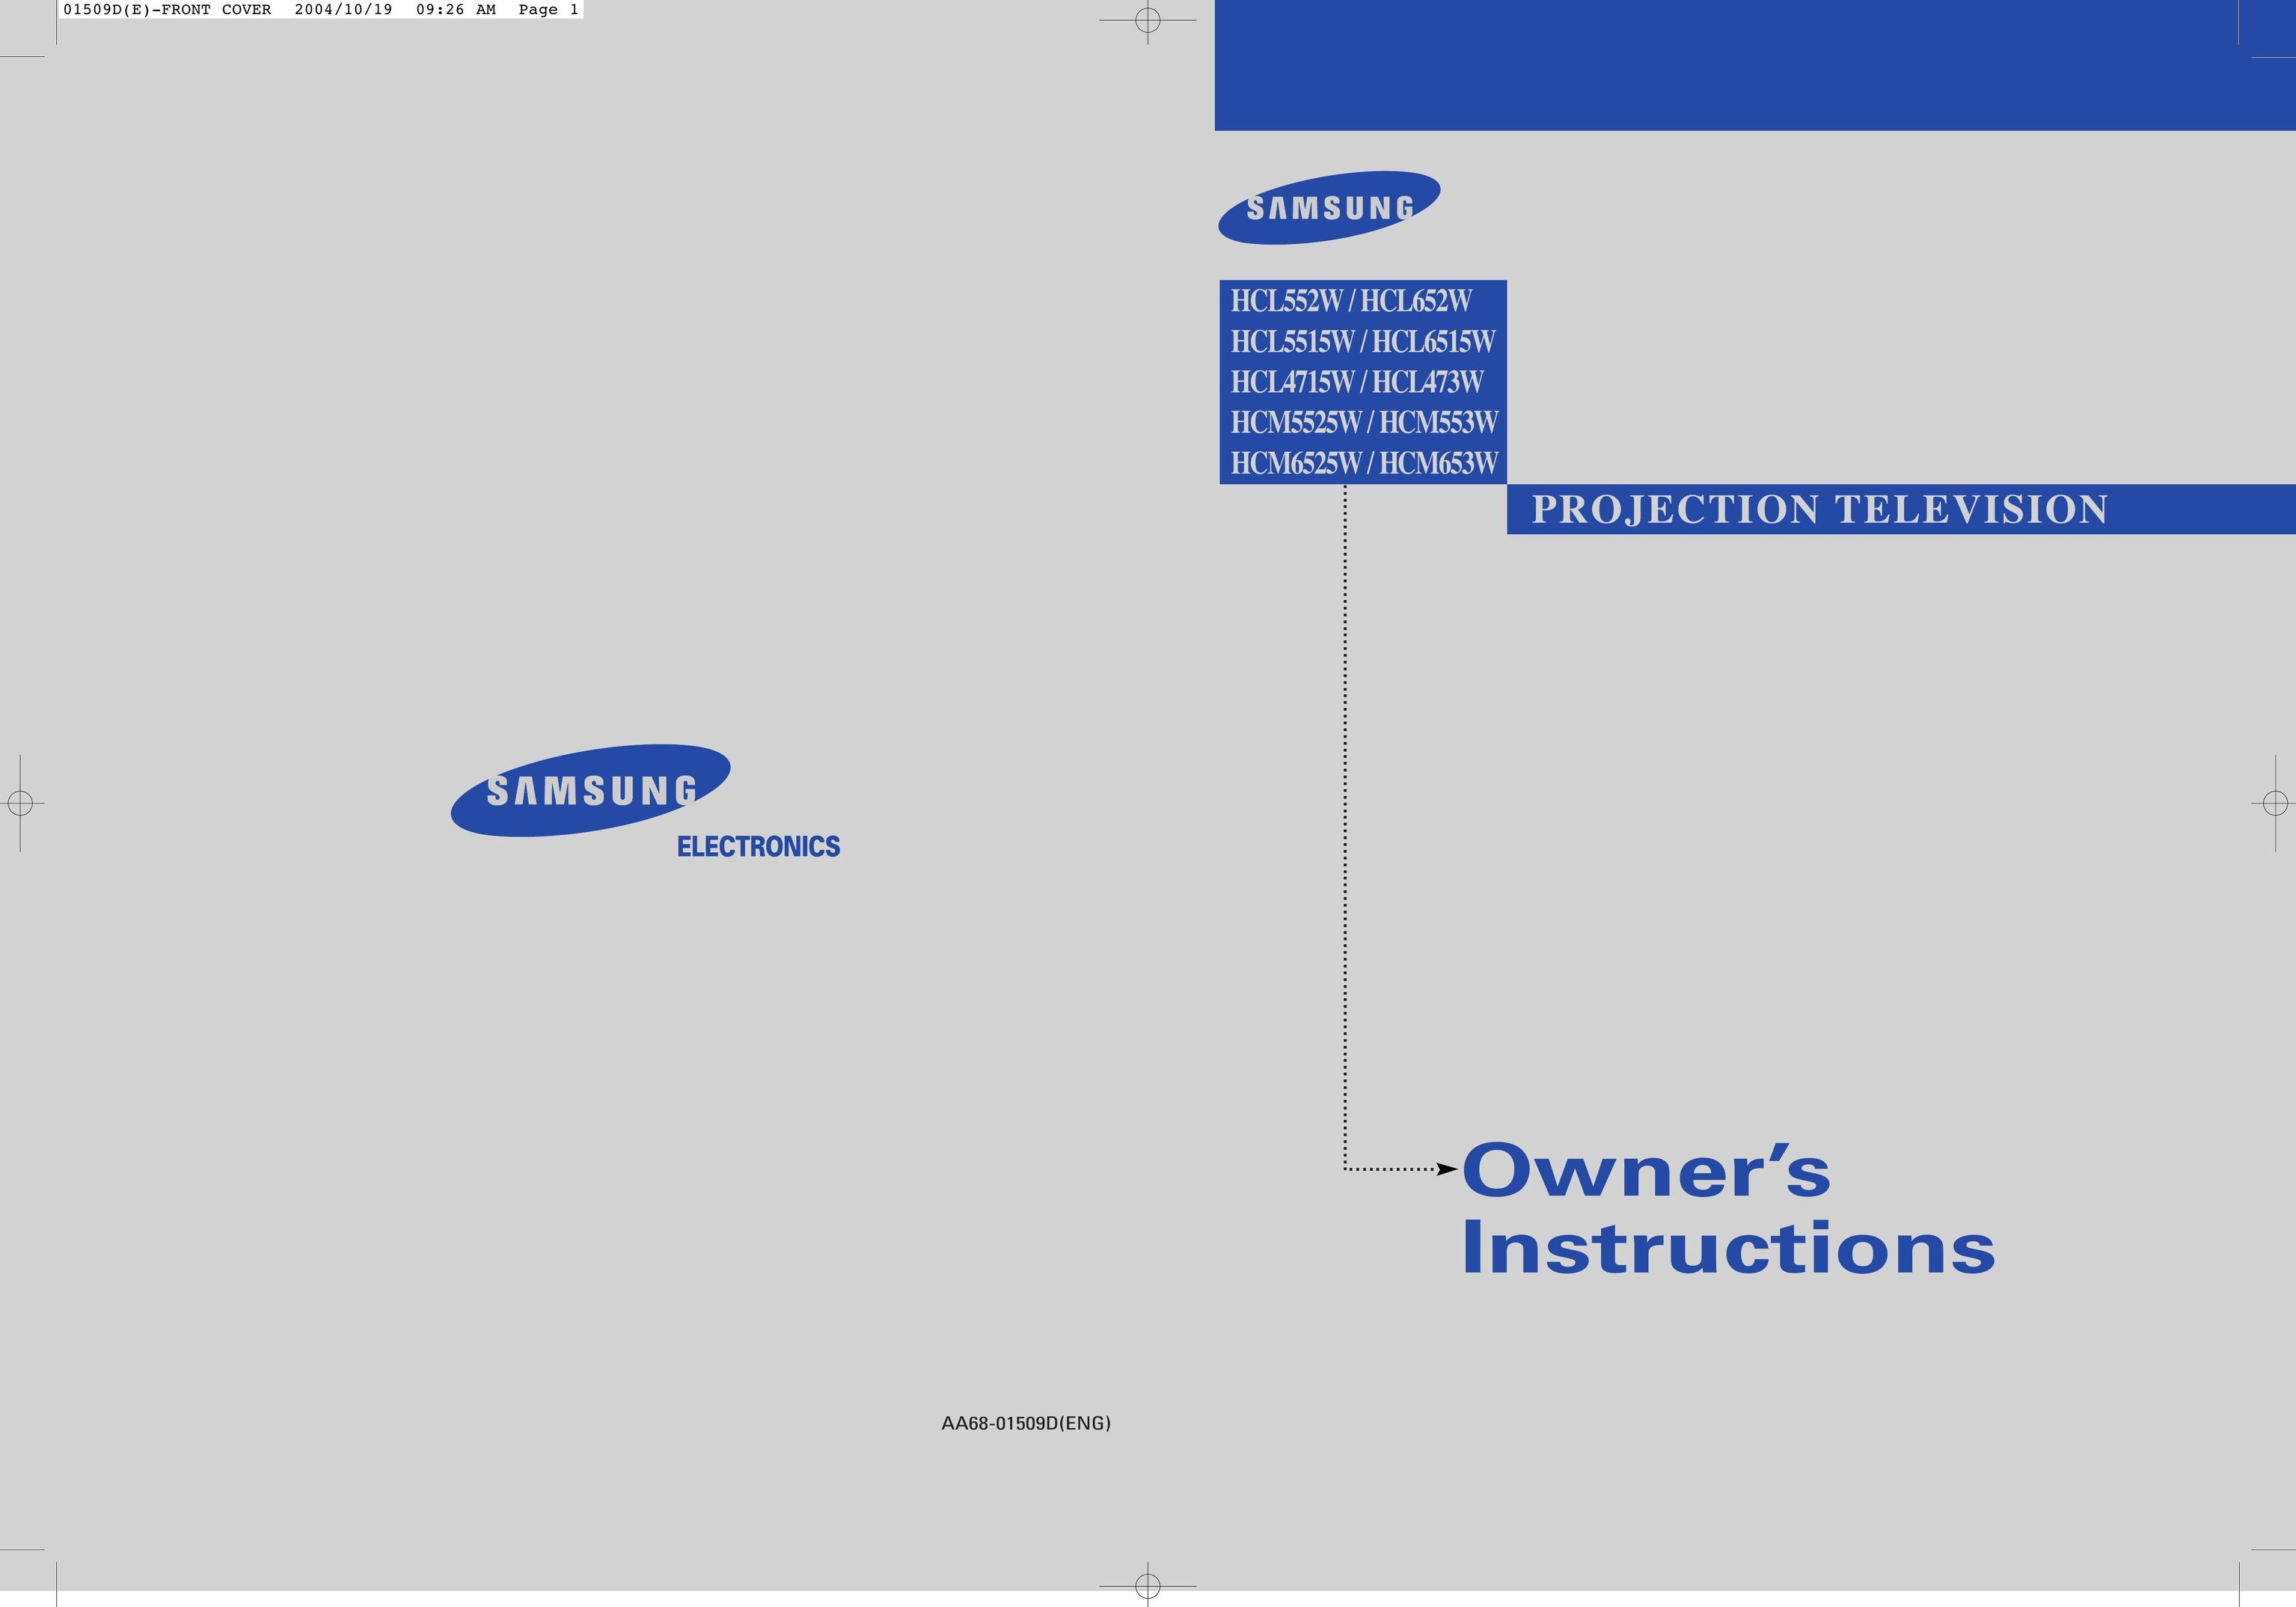 Samsung HCL 473W Projection Television User Manual